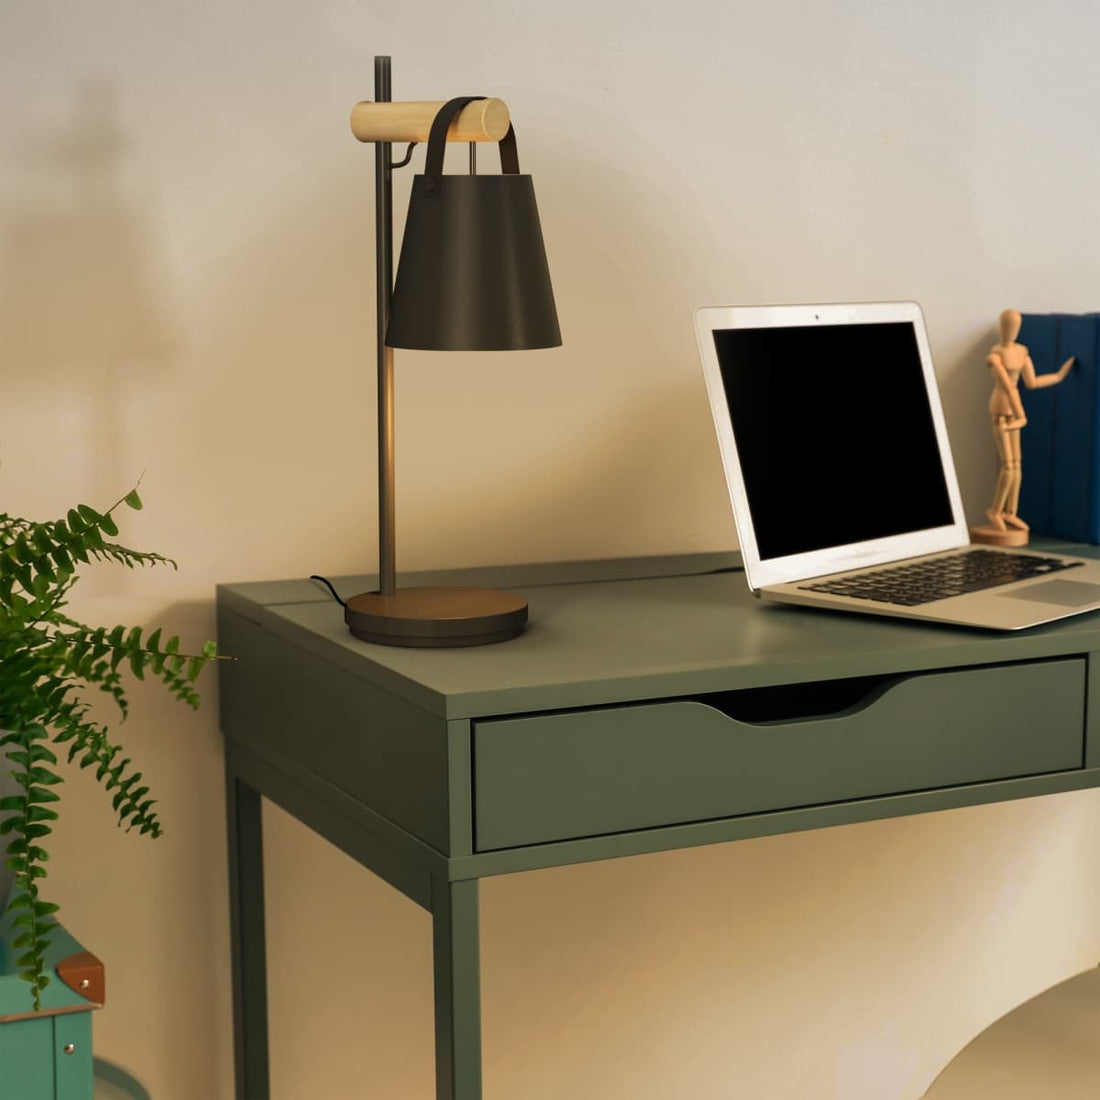 PANDORE TABLE LAMP WOOD AND METAL BLACK 25X56 CM E27 - best price from Maltashopper.com BR420007569